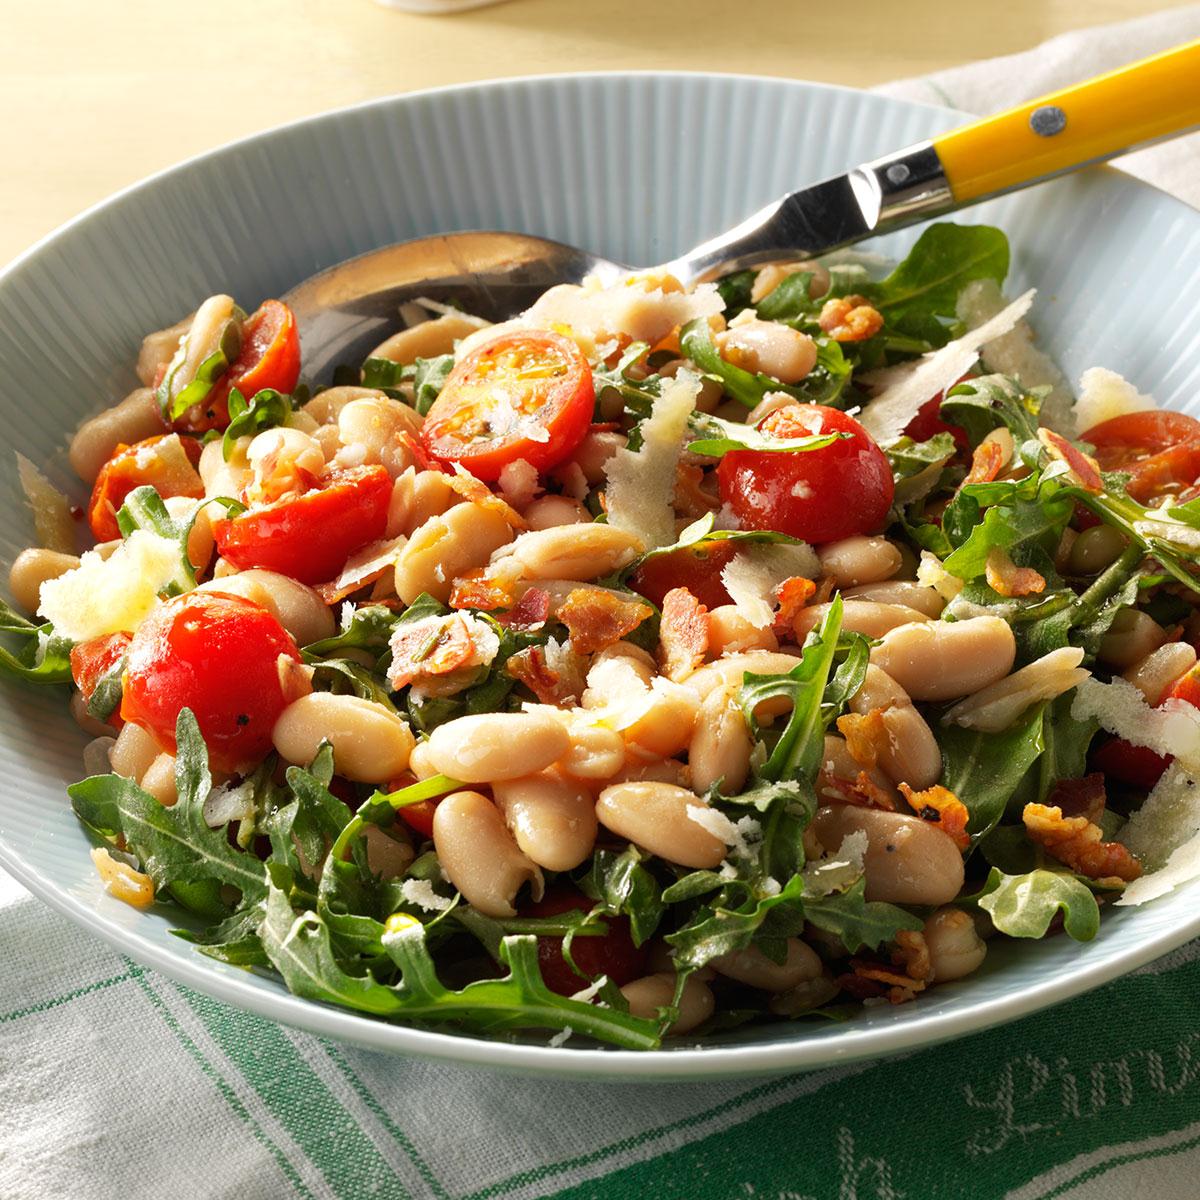 My red, white and green salad is inspired by the Italian flag. Top it with shaved Parmesan. —Malia Estes, Allston, Massachusetts <a href="https://www.tasteofhome.com/recipes/white-bean-arugula-salad/">Get Recipe</a>